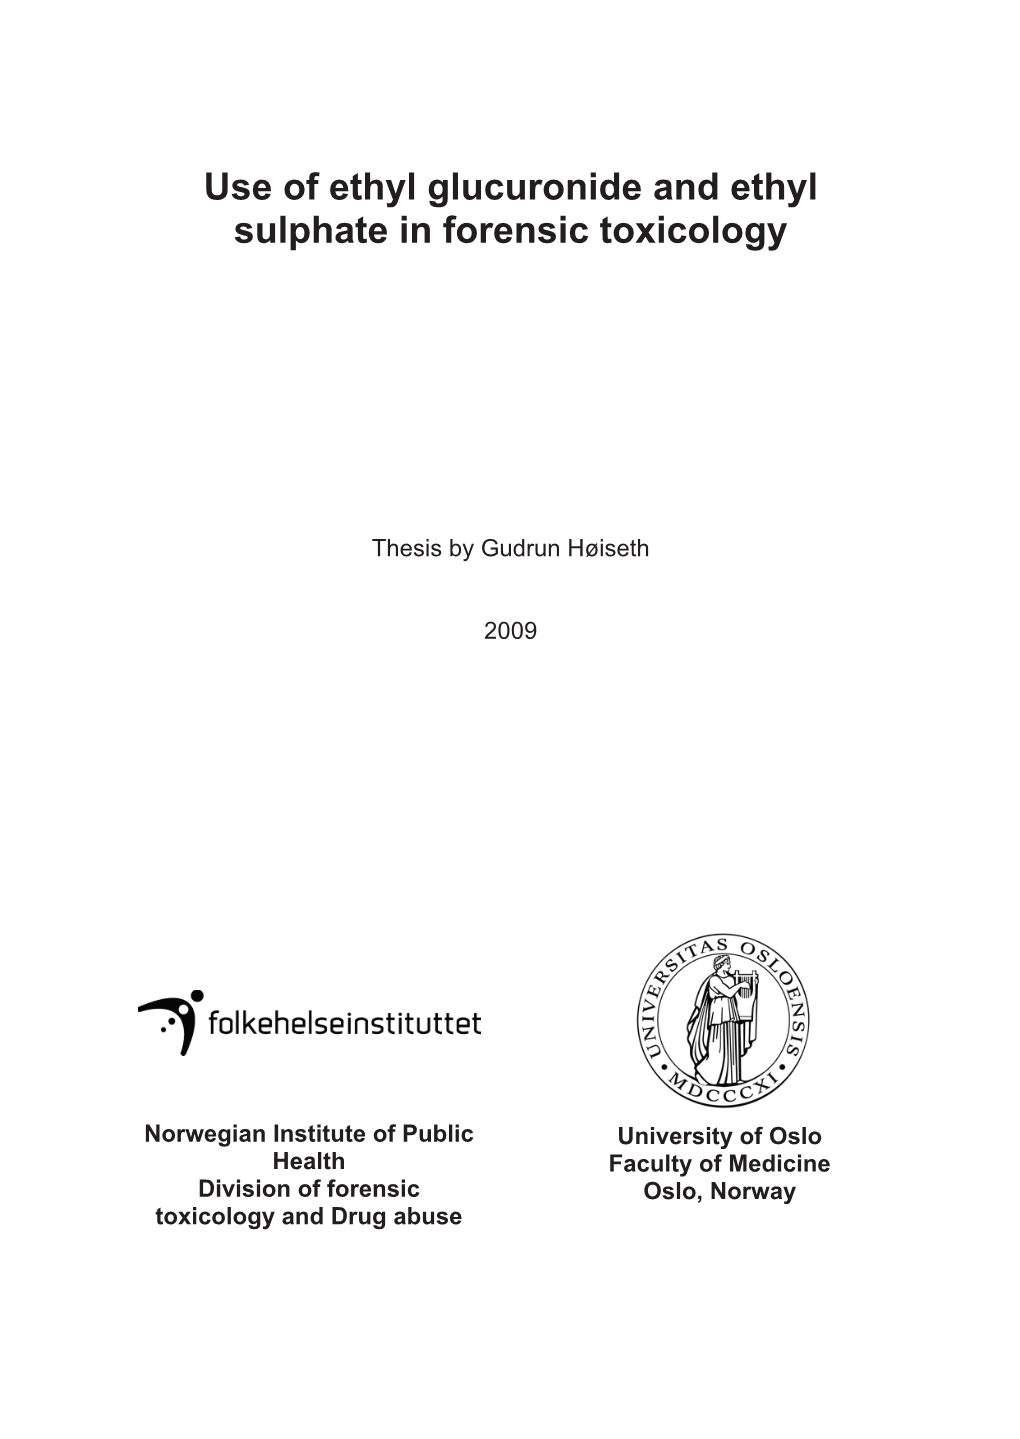 Use of Ethyl Glucuronide and Ethyl Sulphate in Forensic Toxicology